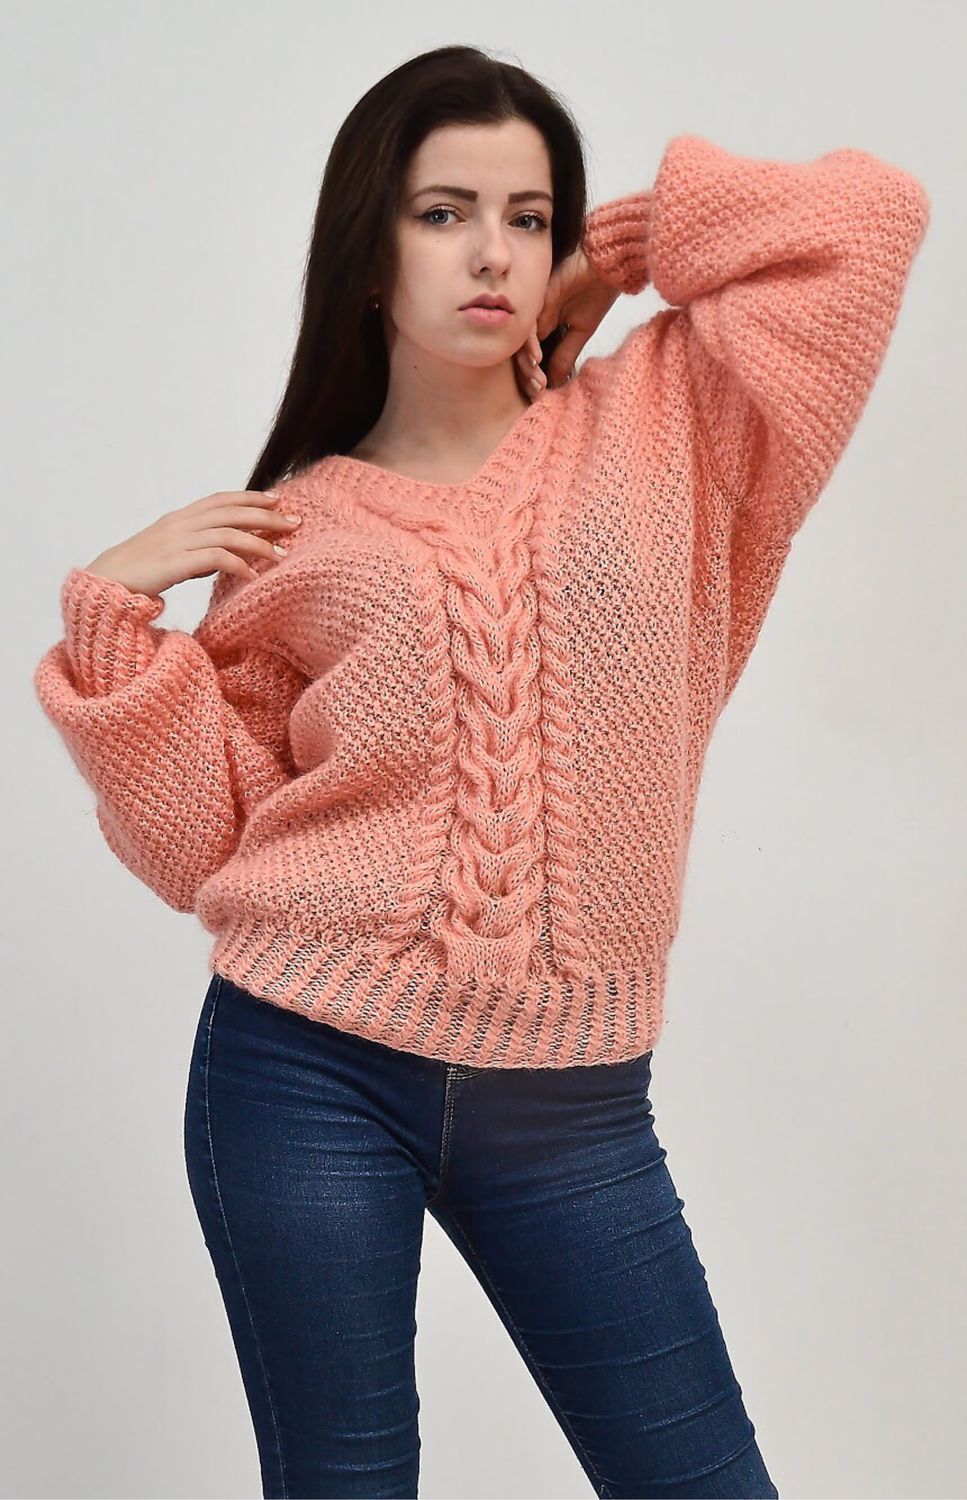 New Knitted sweater women's peach color – купить на Ярмарке Мастеров ...